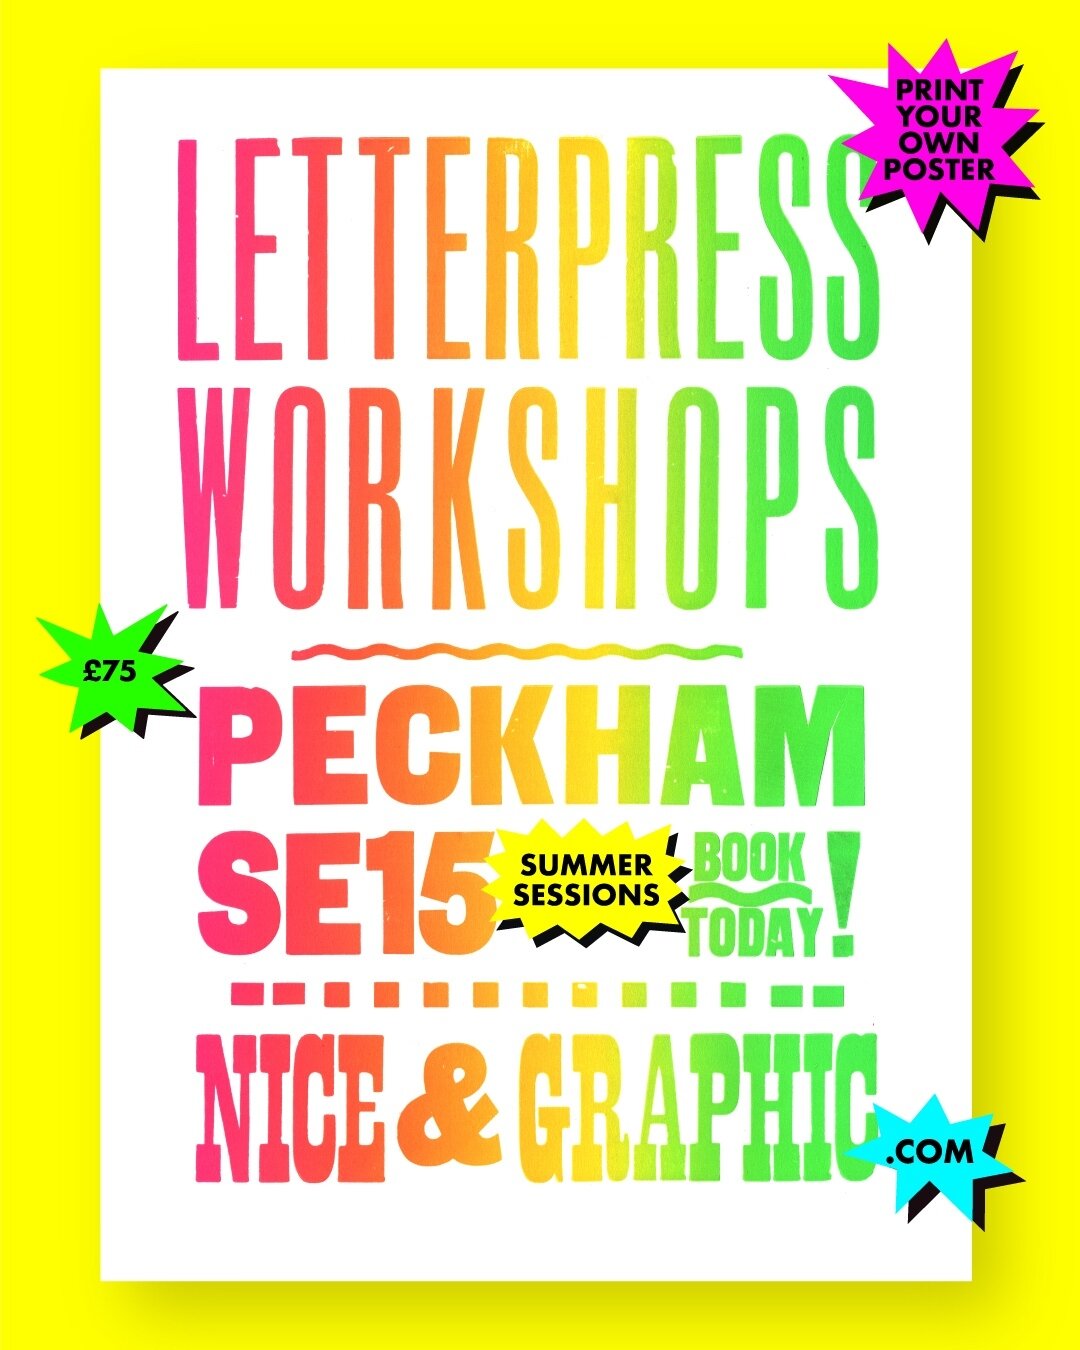 📣 new summer dates just added! 📣 learn letterpress &amp; print your own poster ⚡️no experience needed 💫 peckham SE15 4NH ✨ ⁠
⁠
🌟 Sunday June 11th⁠
💫 Saturday July 8th⁠
⚡️ Saturday July 15th⁠
✨ Saturday July 29th⁠
⁠
#londonletterpress #letterpres